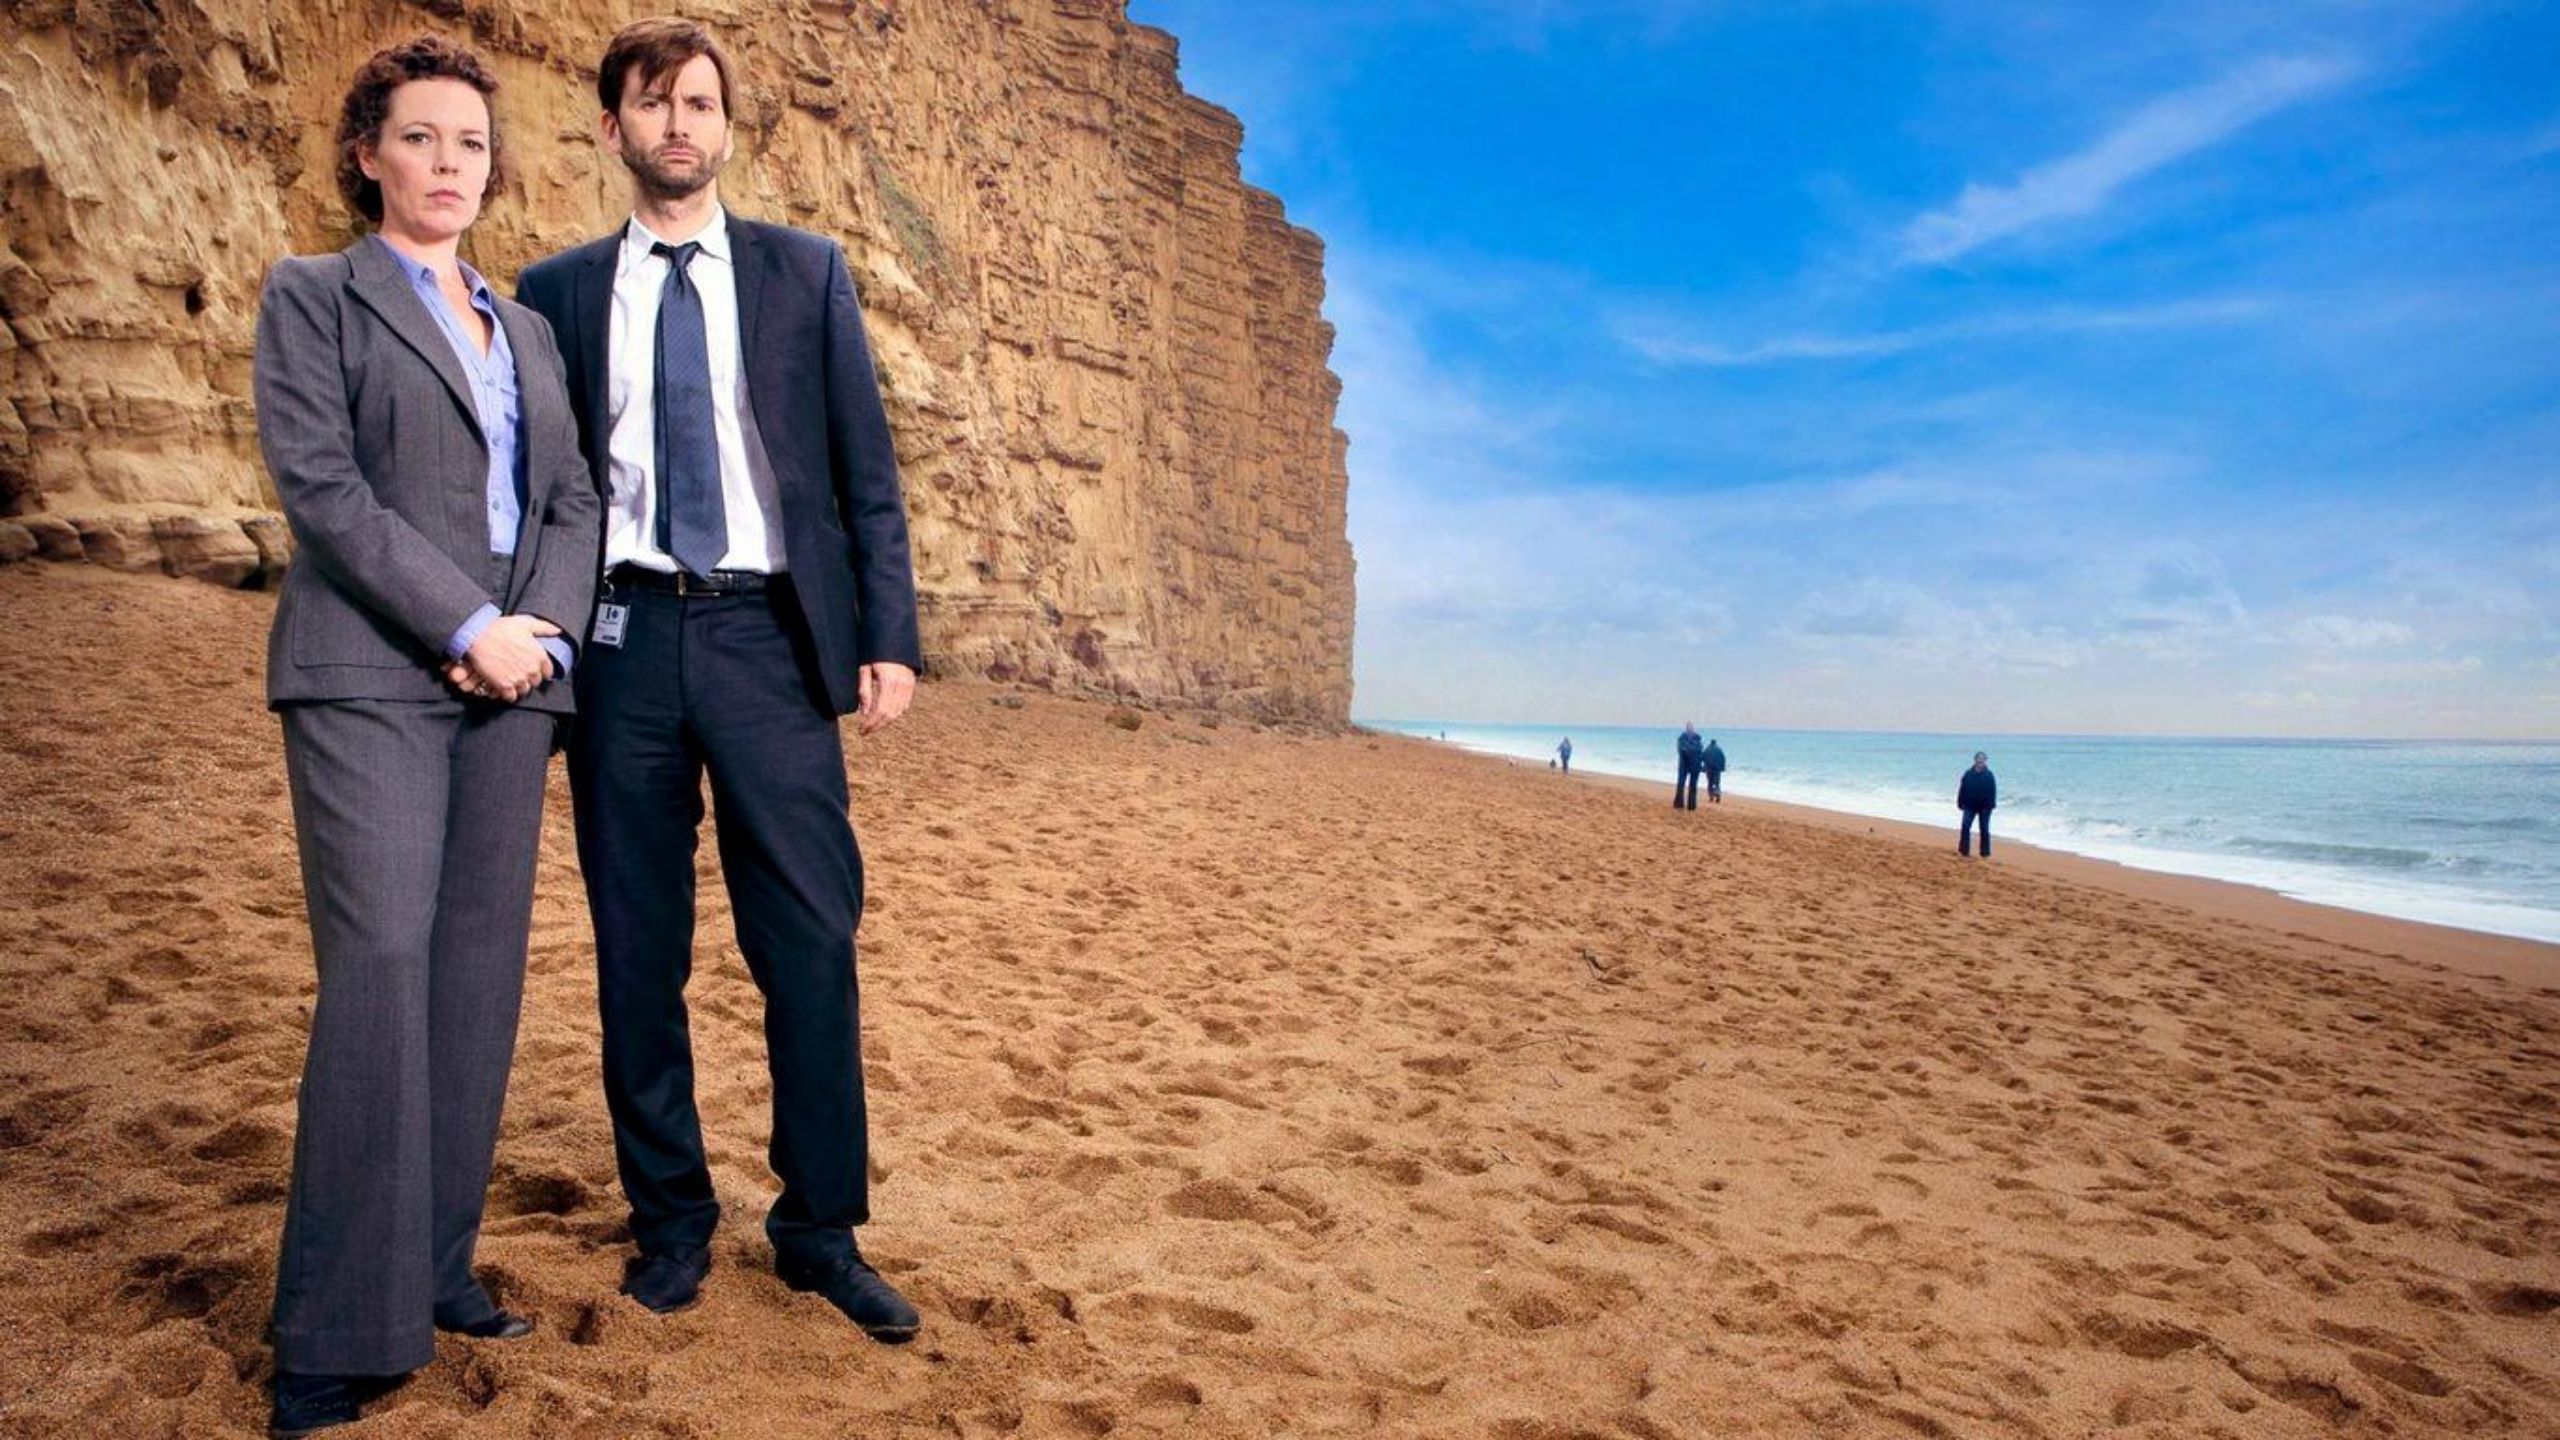 Olivia Colman and David Tenant stand in suits on a picturesque beach